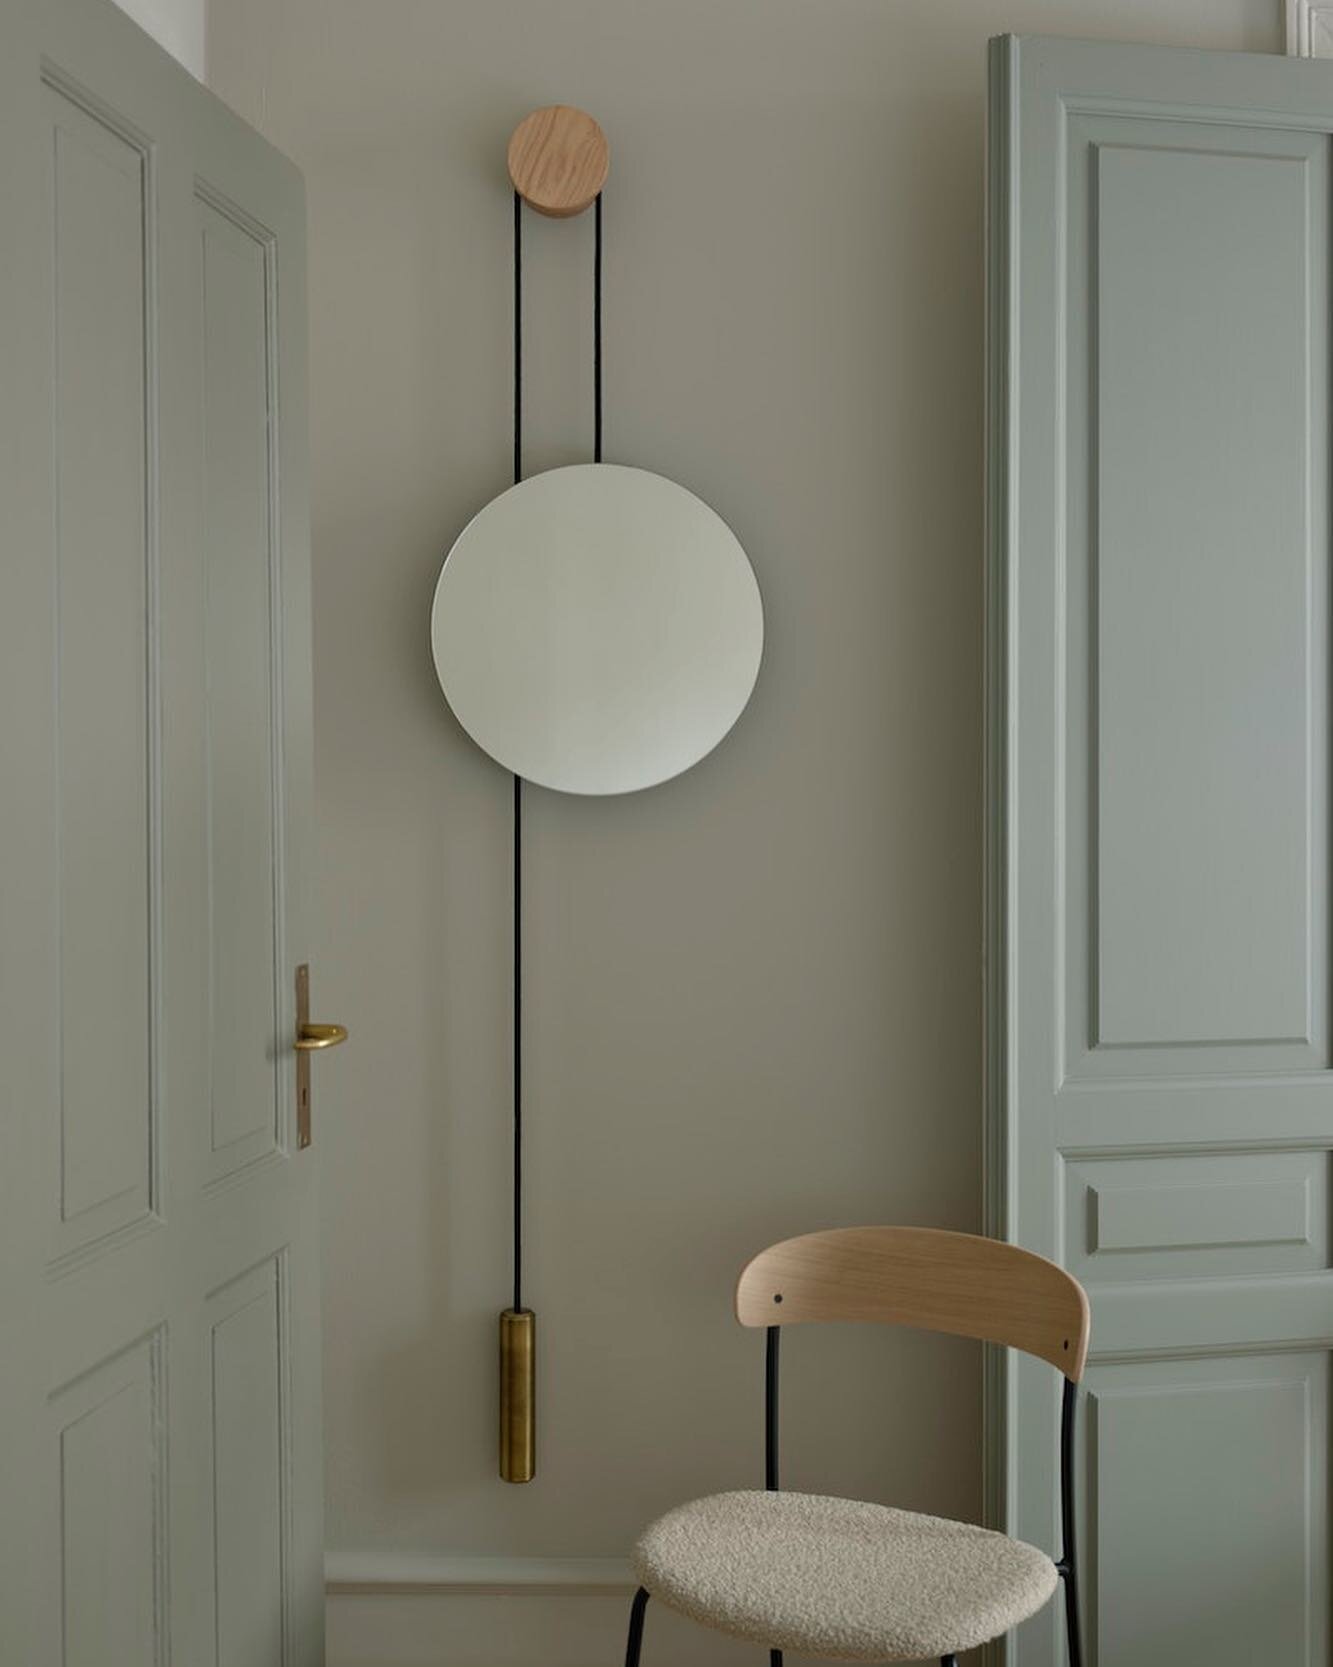 Our Rise &amp; Shine mirror for @newworksdk. Hight adjustable, counter balanced and available in oak with a brass weight, or a burned oak finish with a steel weight.

Available from:
@skandium_com in the UK
@oslodeco in Norway 

Find worldwide dealer